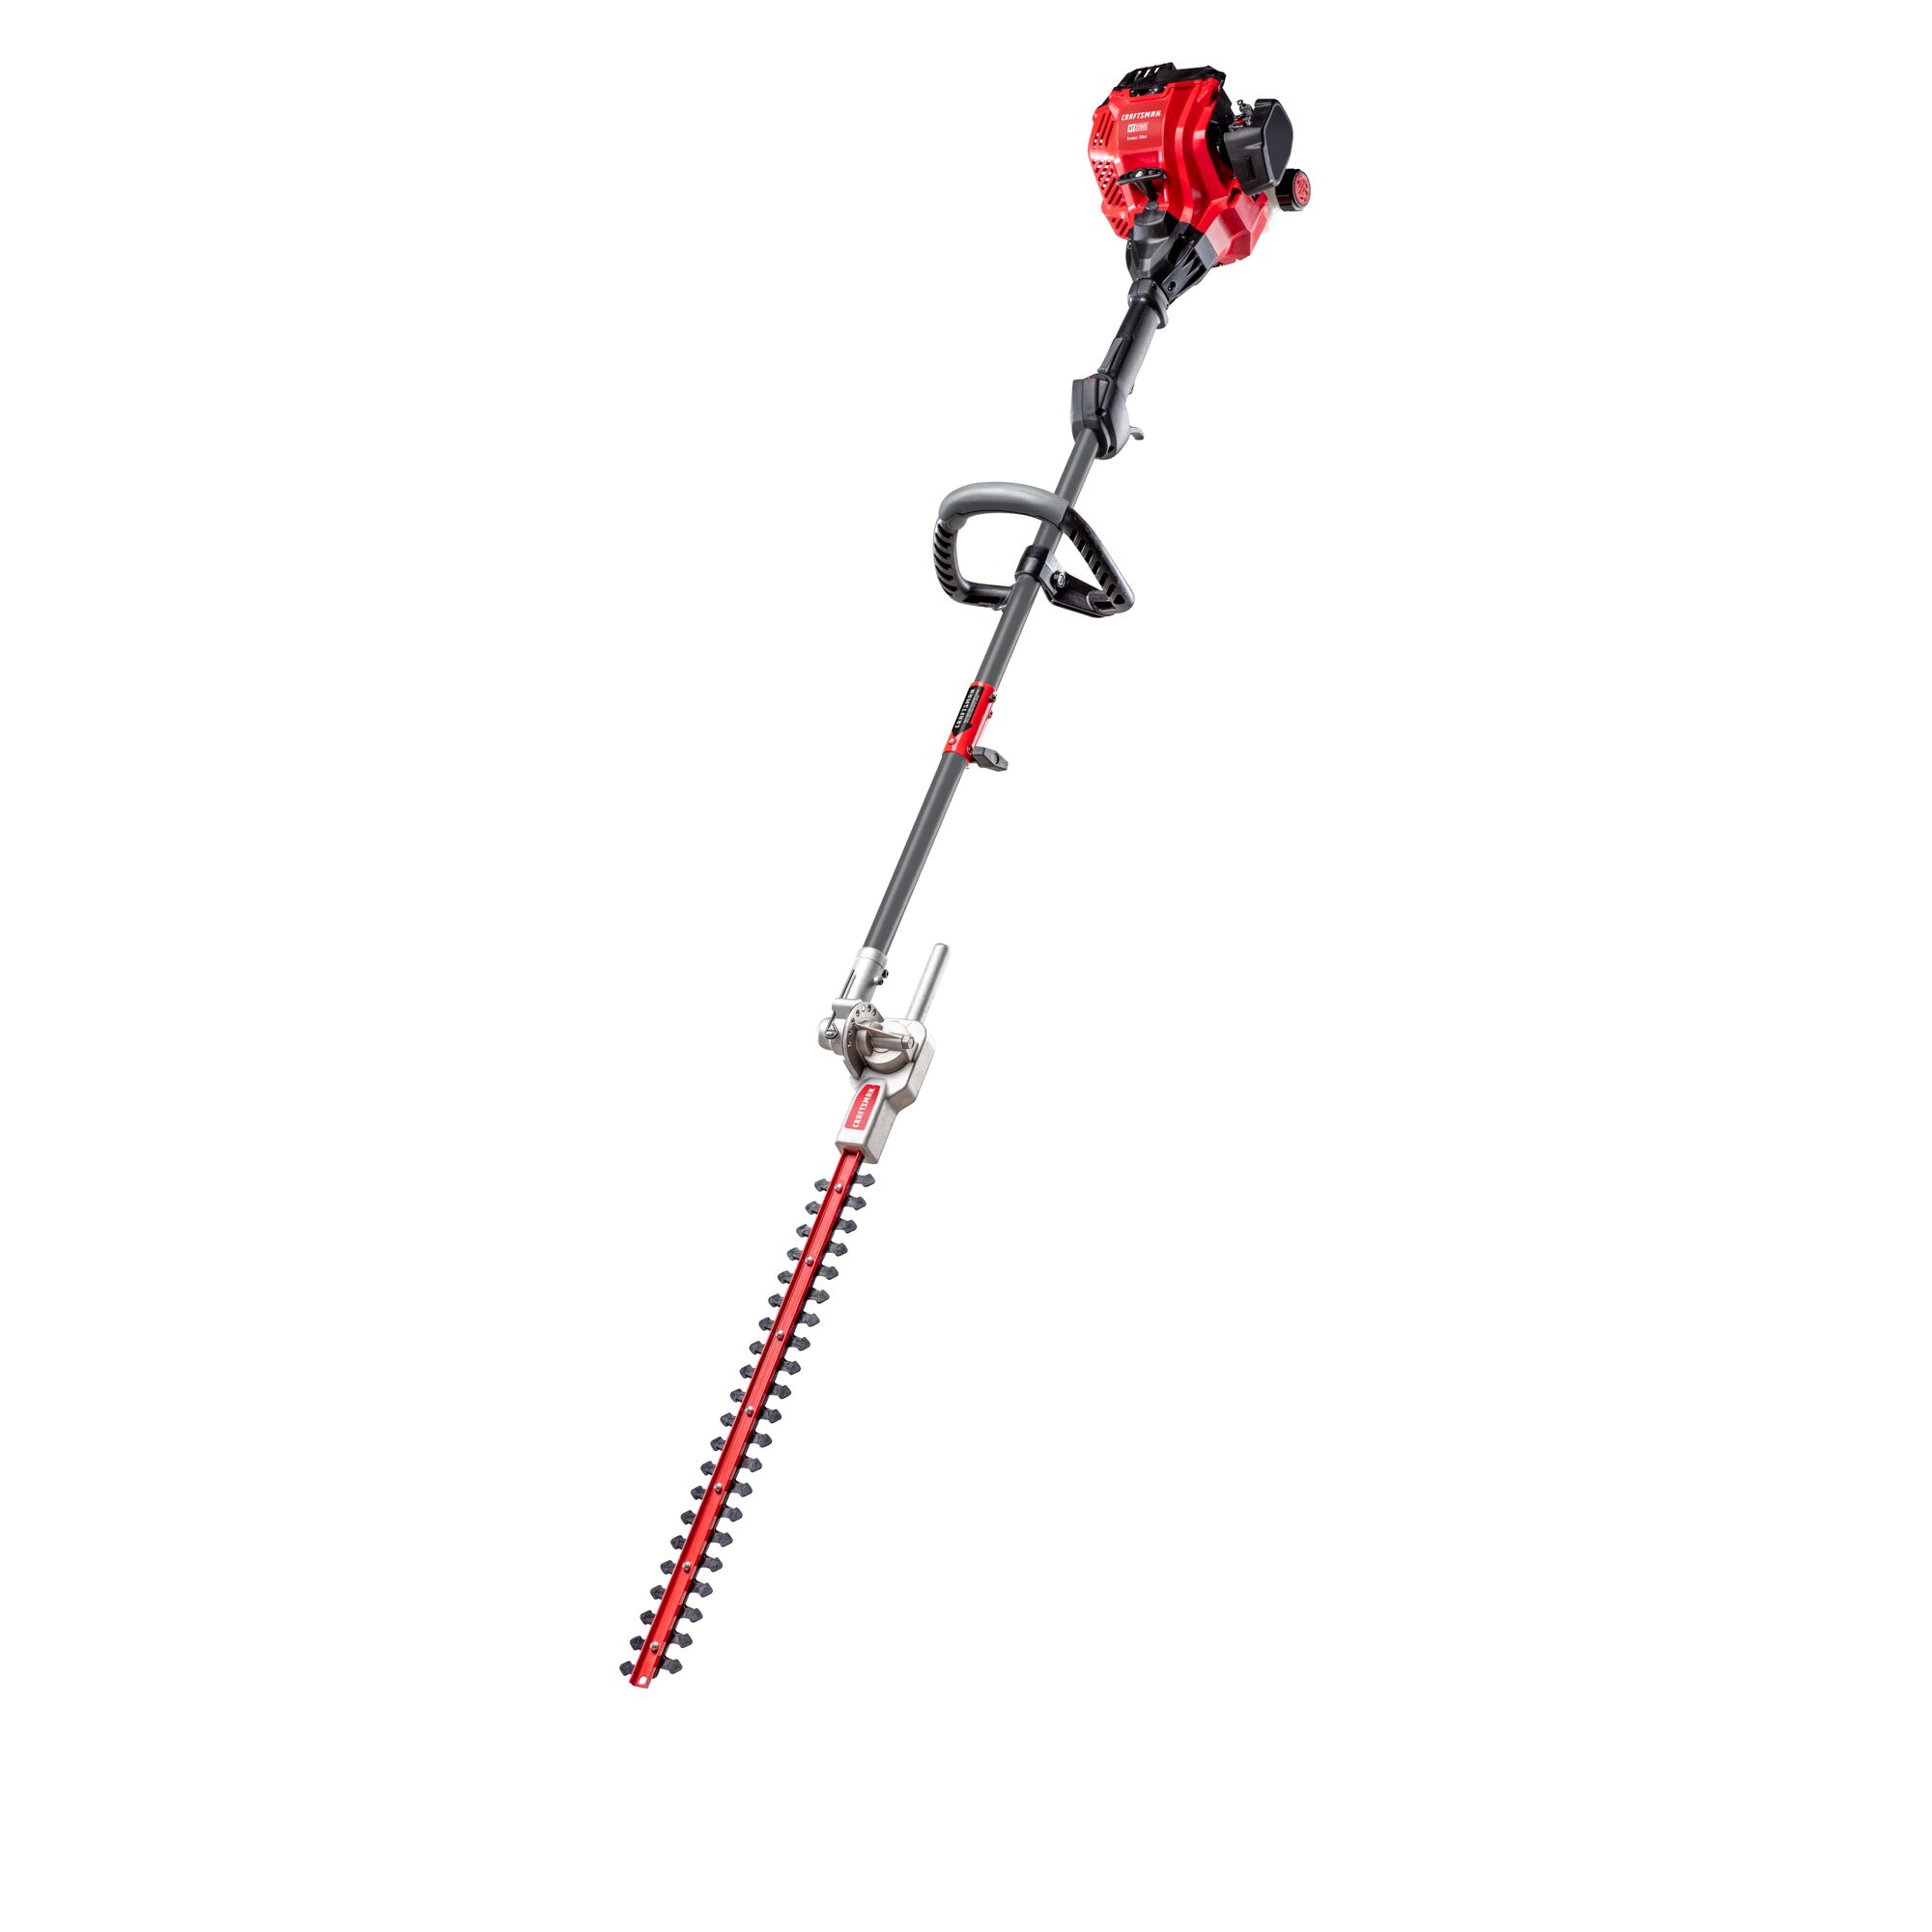 CRAFTSMAN HT2200 Gas Pole Hedge Trimmer on white background